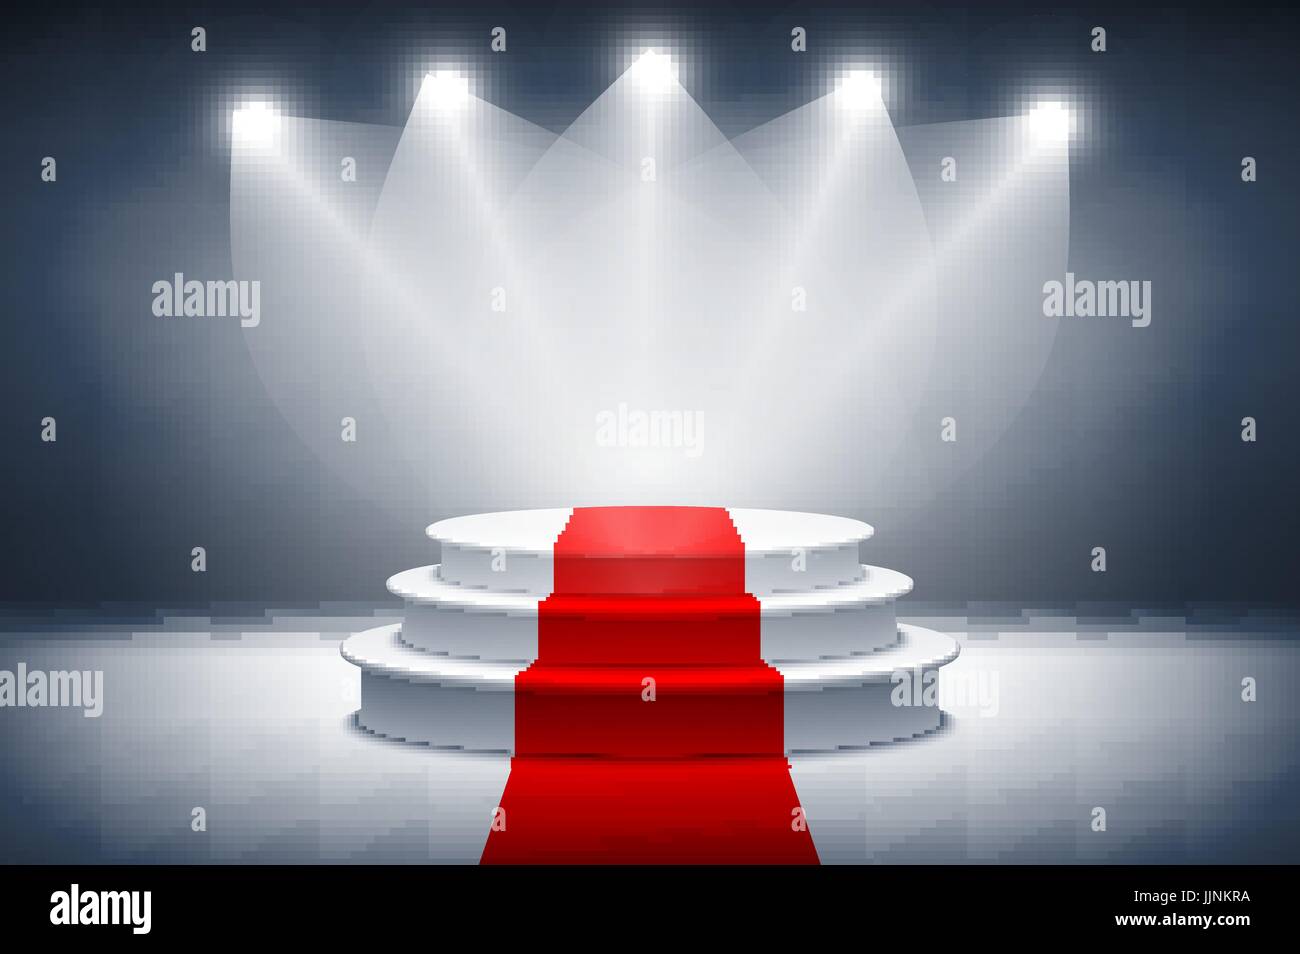 3d Illuminated stage podium with red carpet for award ceremony vector illustration art Stock Vector